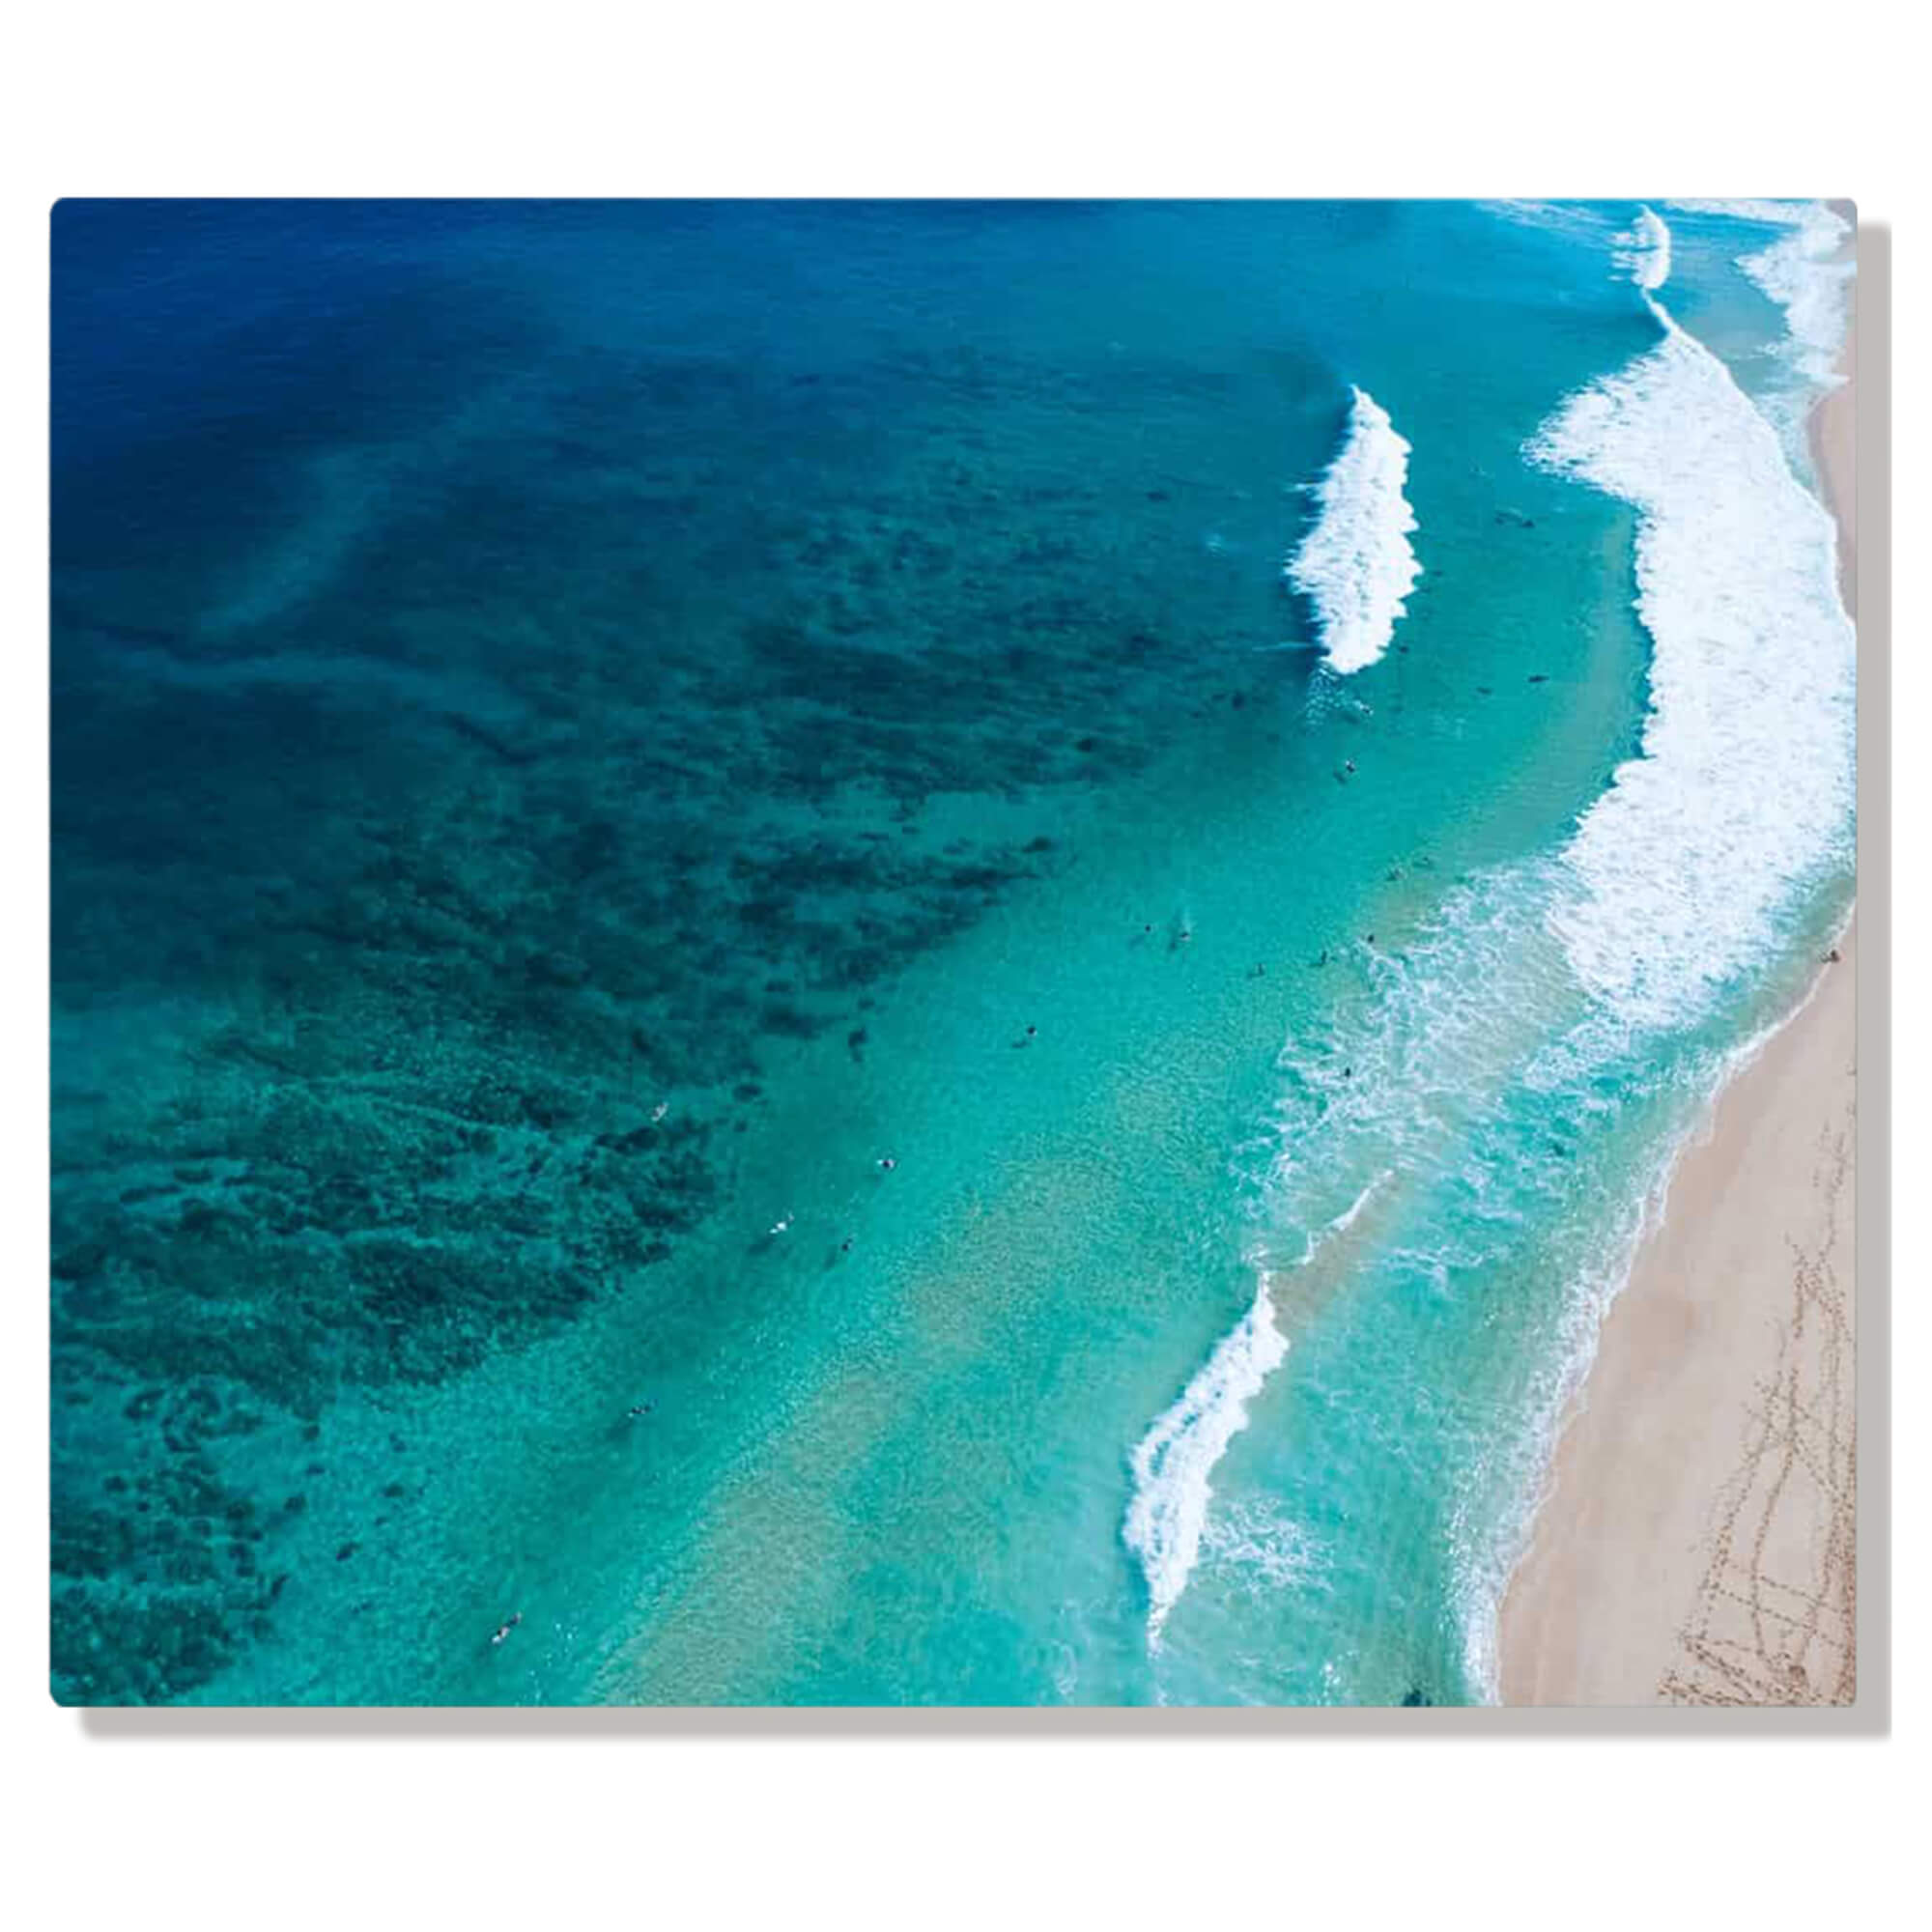 A metal art print of a drone photo of famous waves and surfers near Pupukea by Hawaii artist Bree Poort